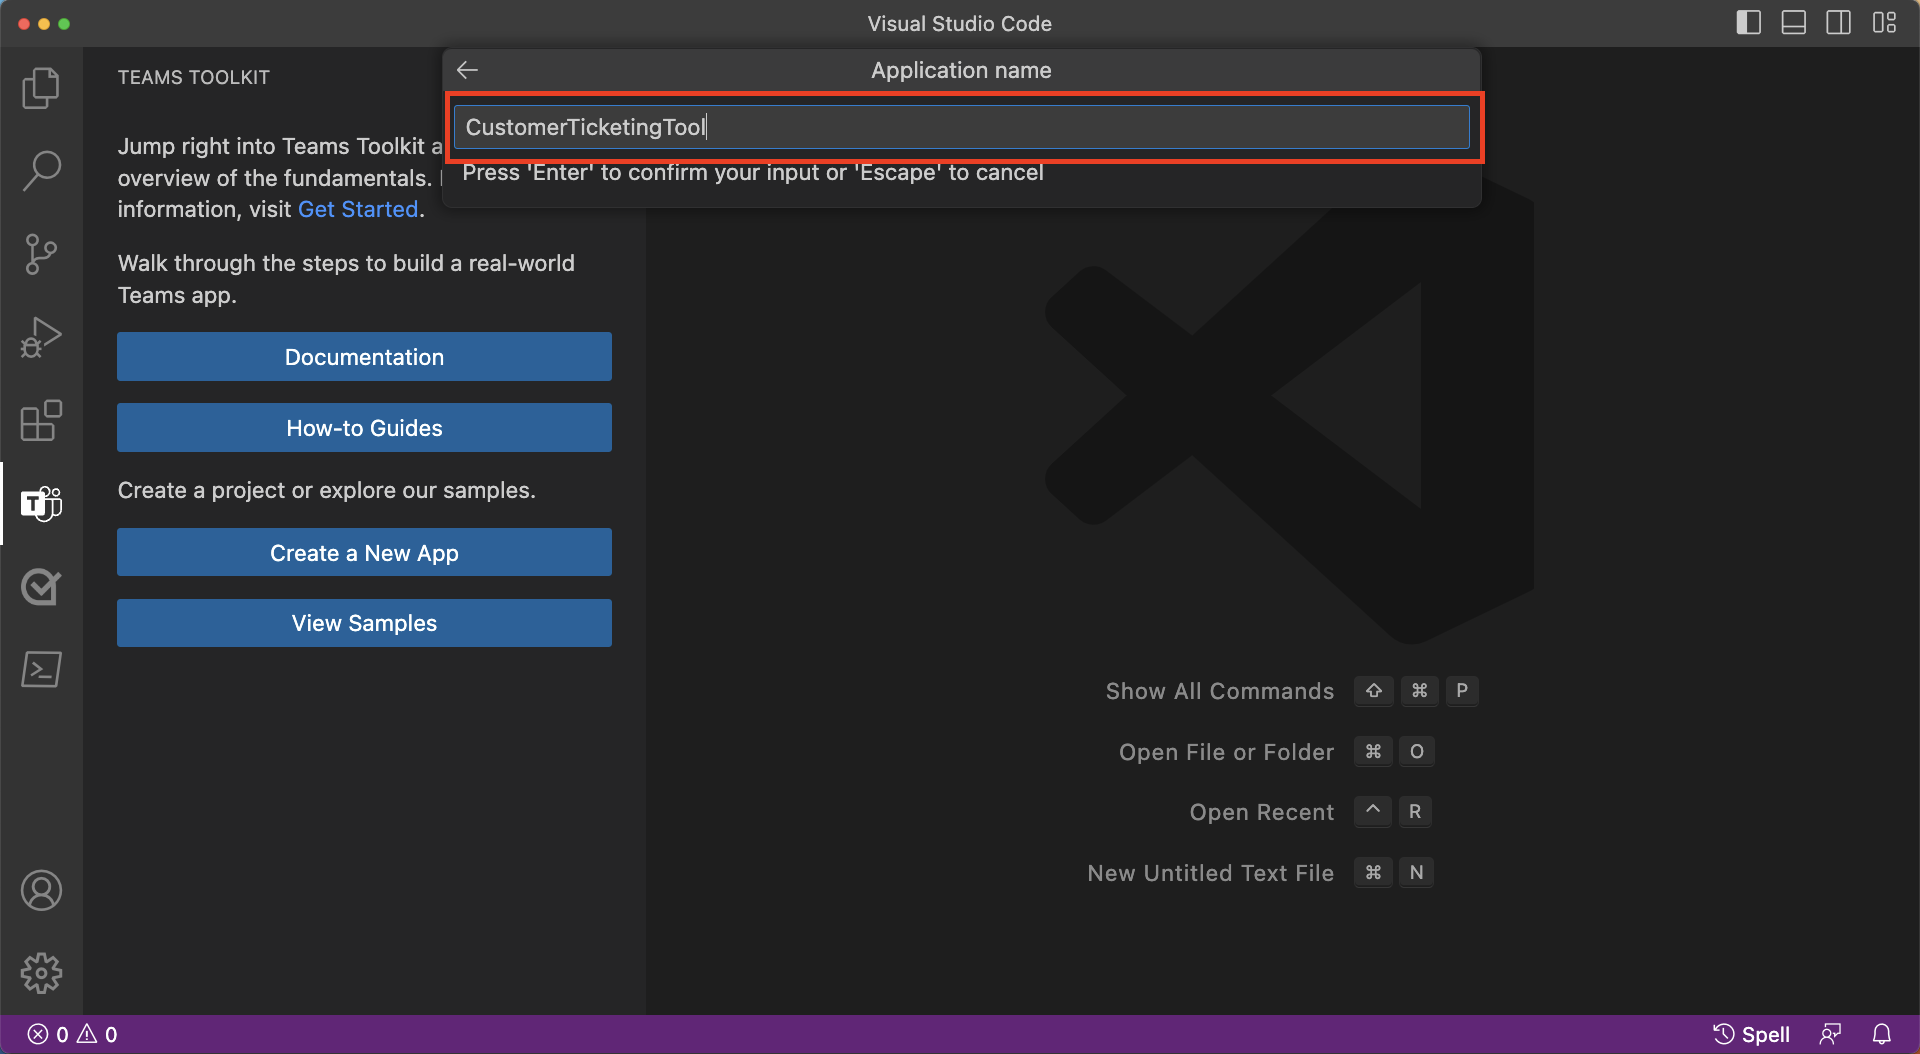 Screenshot that shows the box for entering an application name in Visual Studio Code.